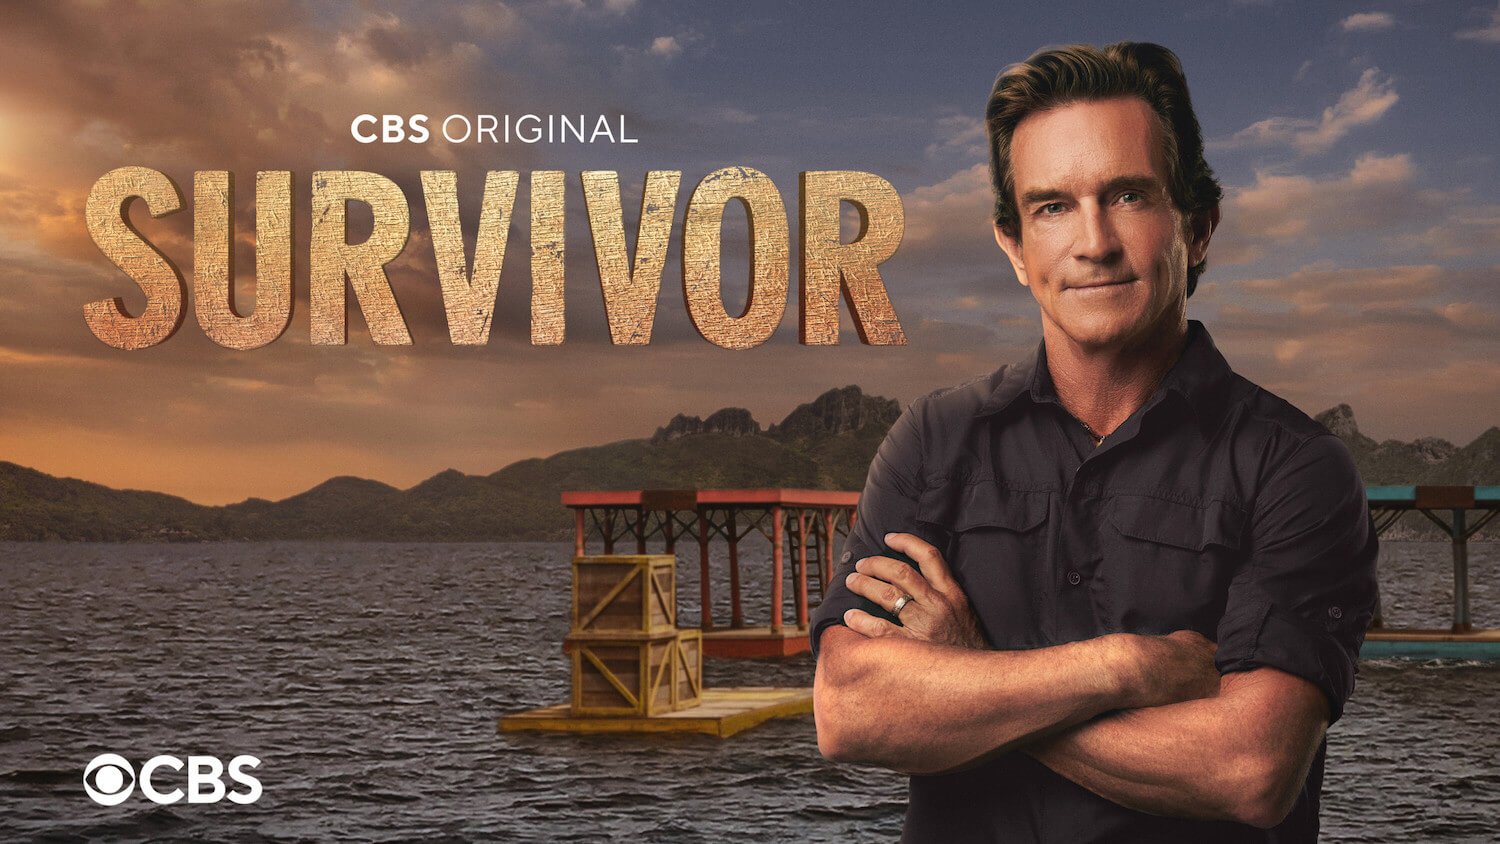 Jeff Probst, the host of 'Survivor 45' standing with his arms across next to the 'Survivor' logo